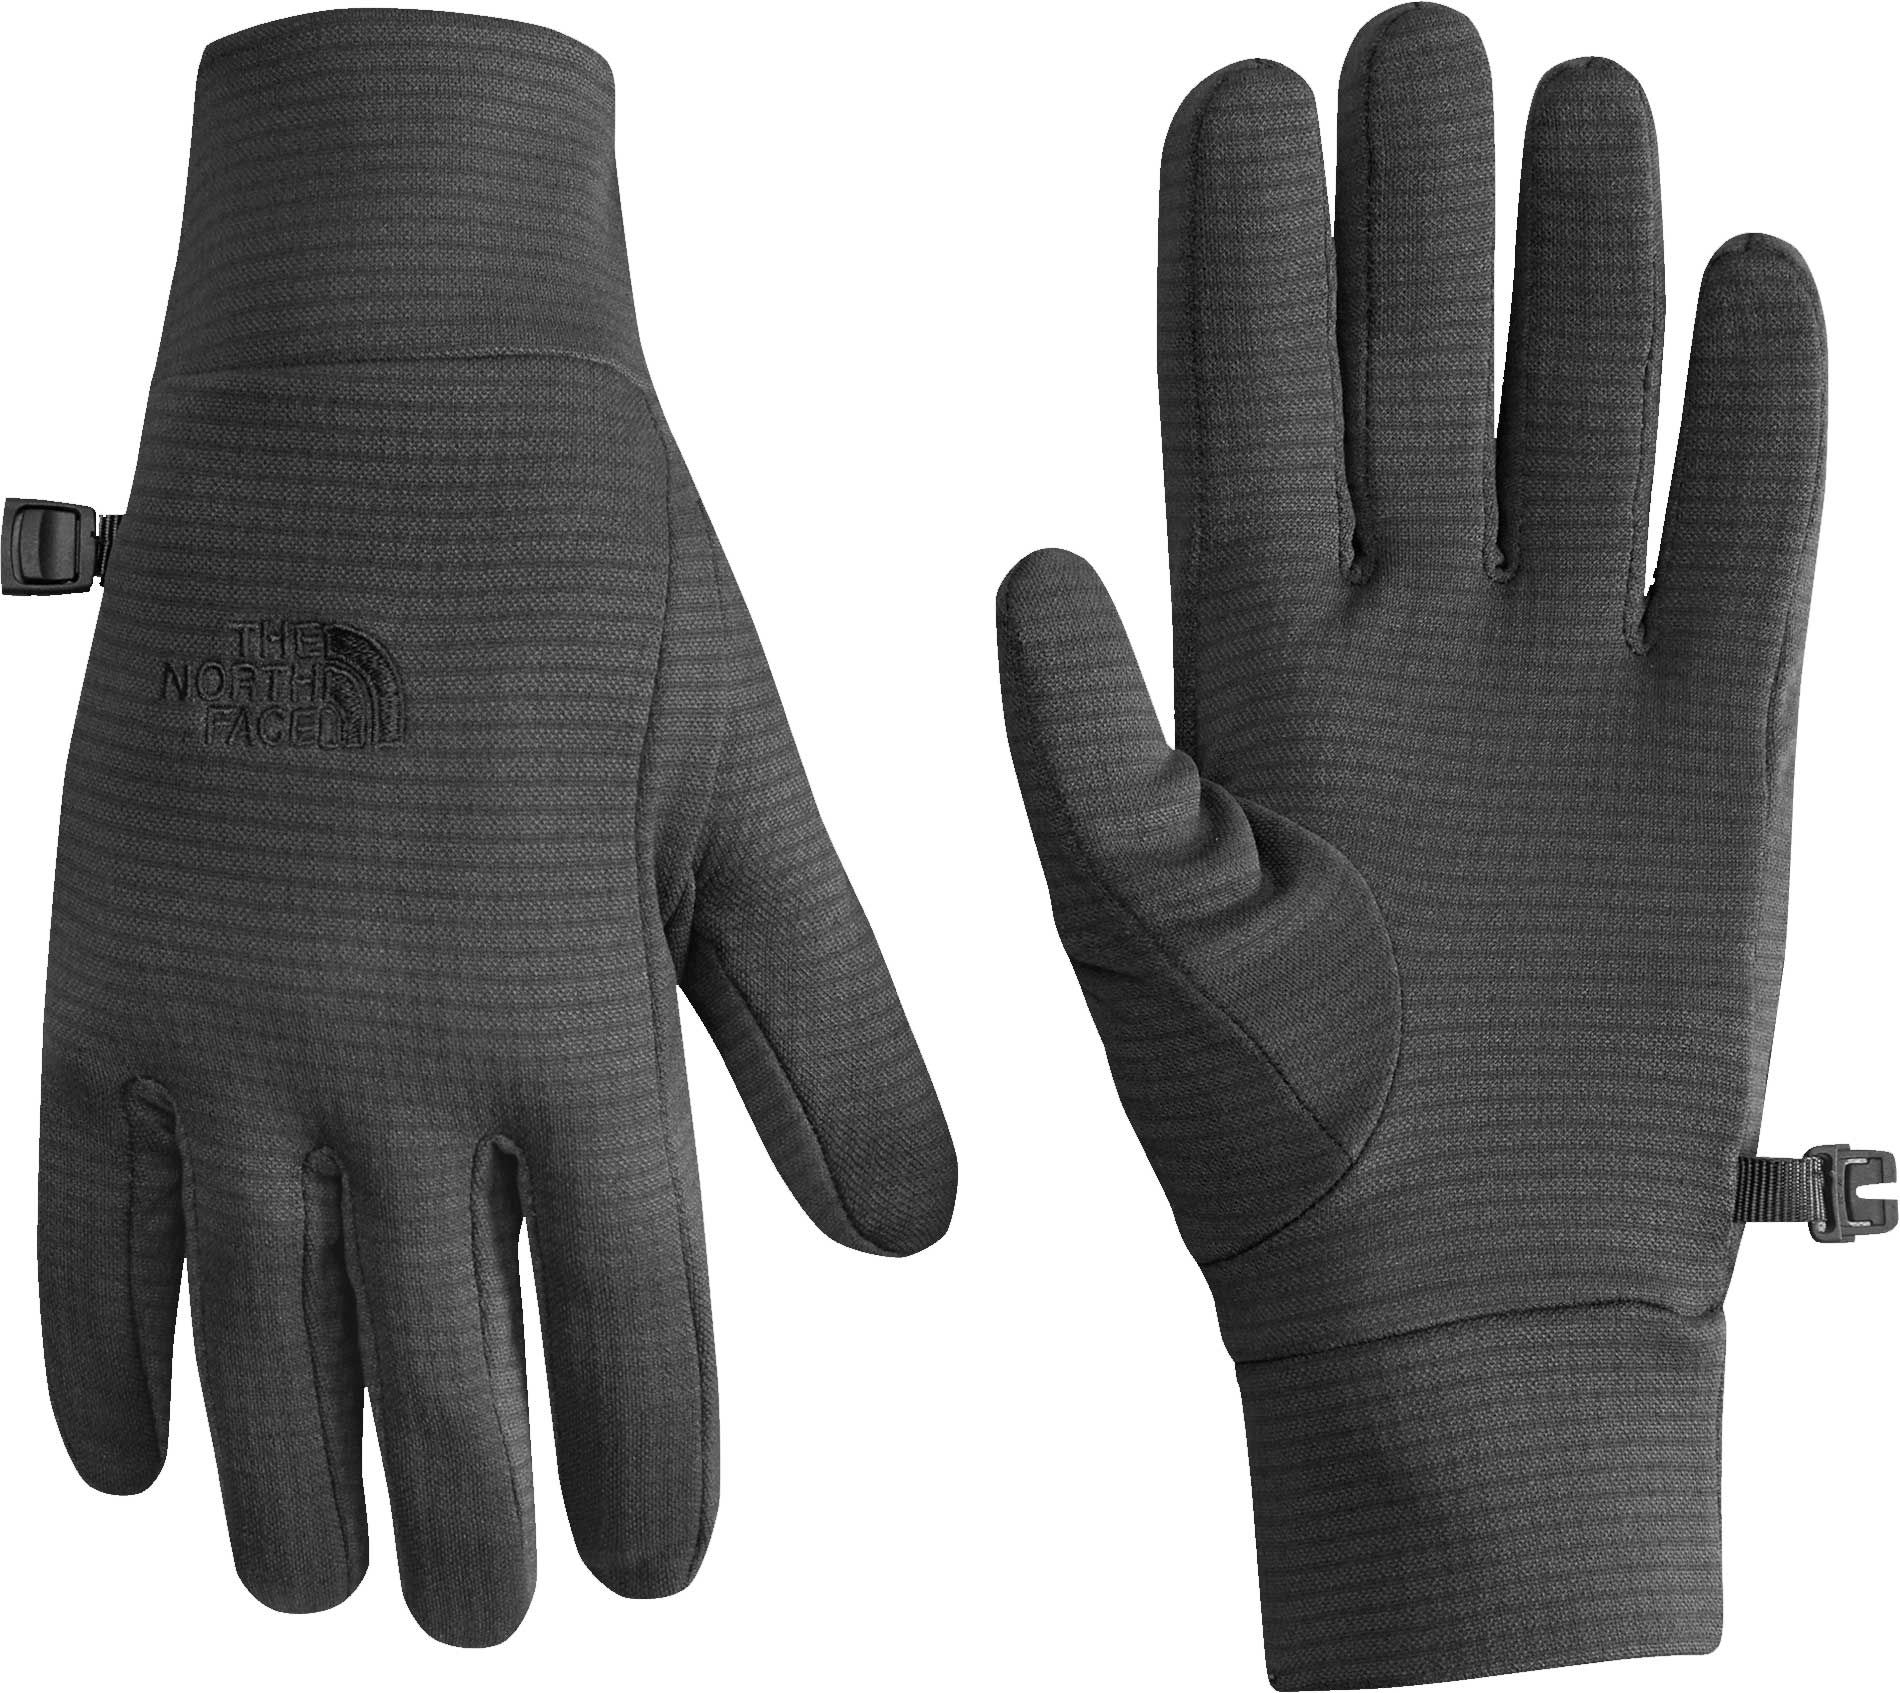 the north face running gloves